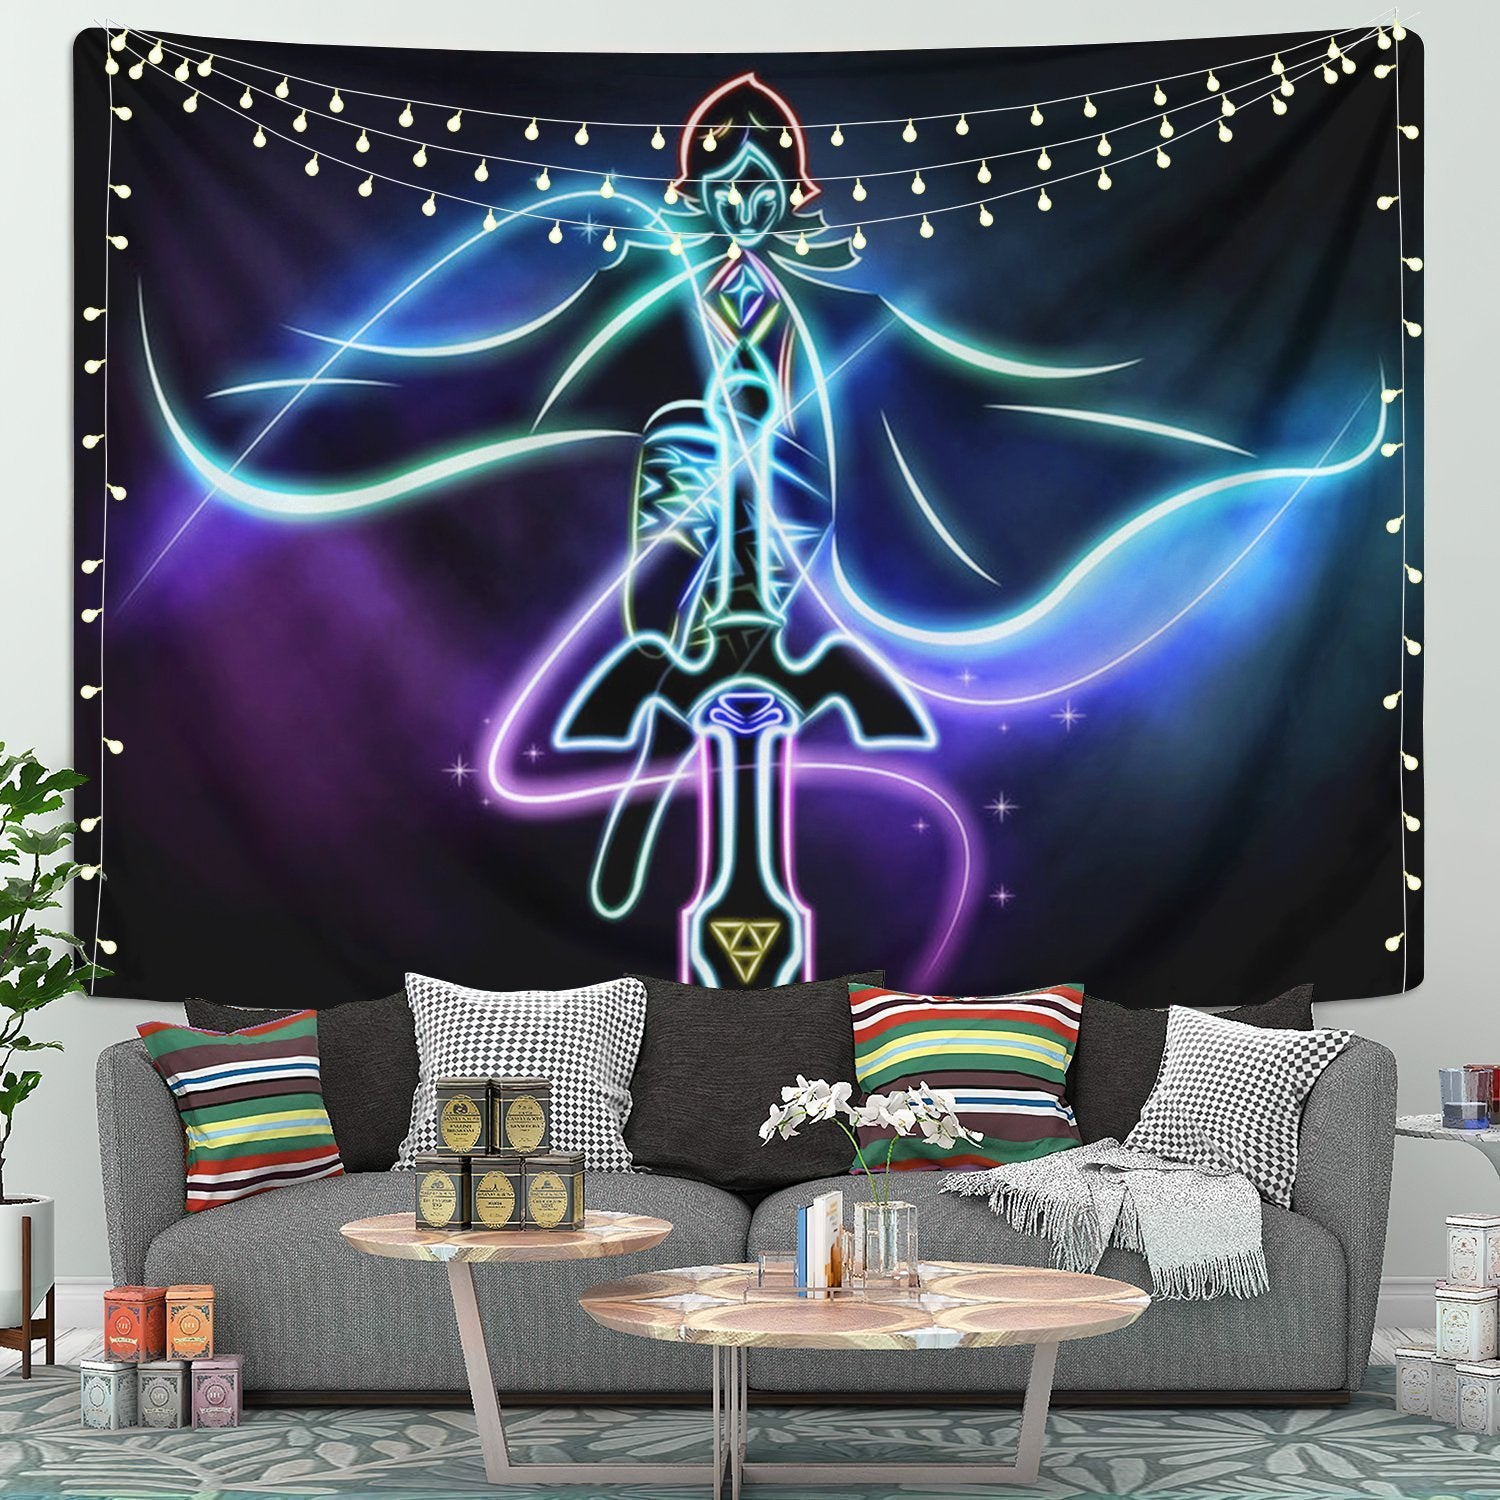 Fee And The Master Sword The Legend Of Zelda Tapestry Room Decor